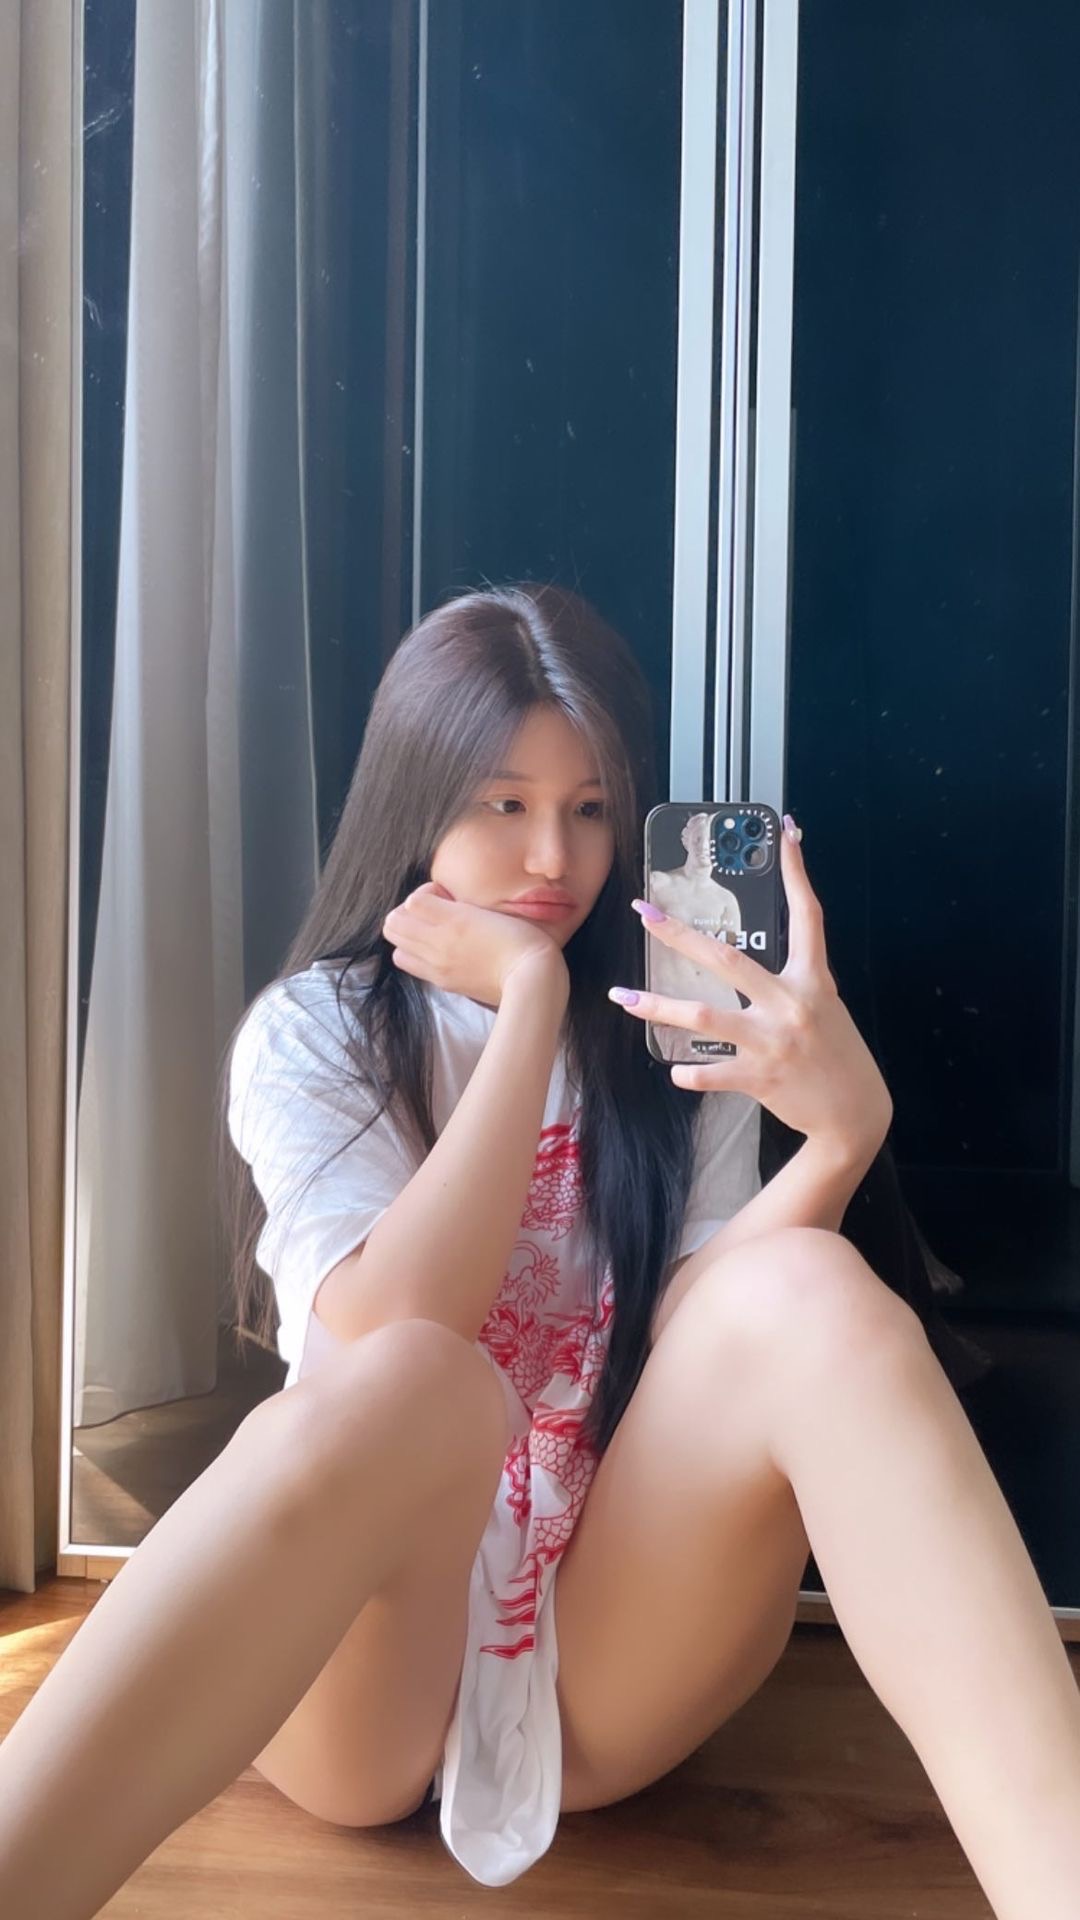 I’m Asian ready to meet and have fun honey and my snap is s_puiyi041 💕🥰